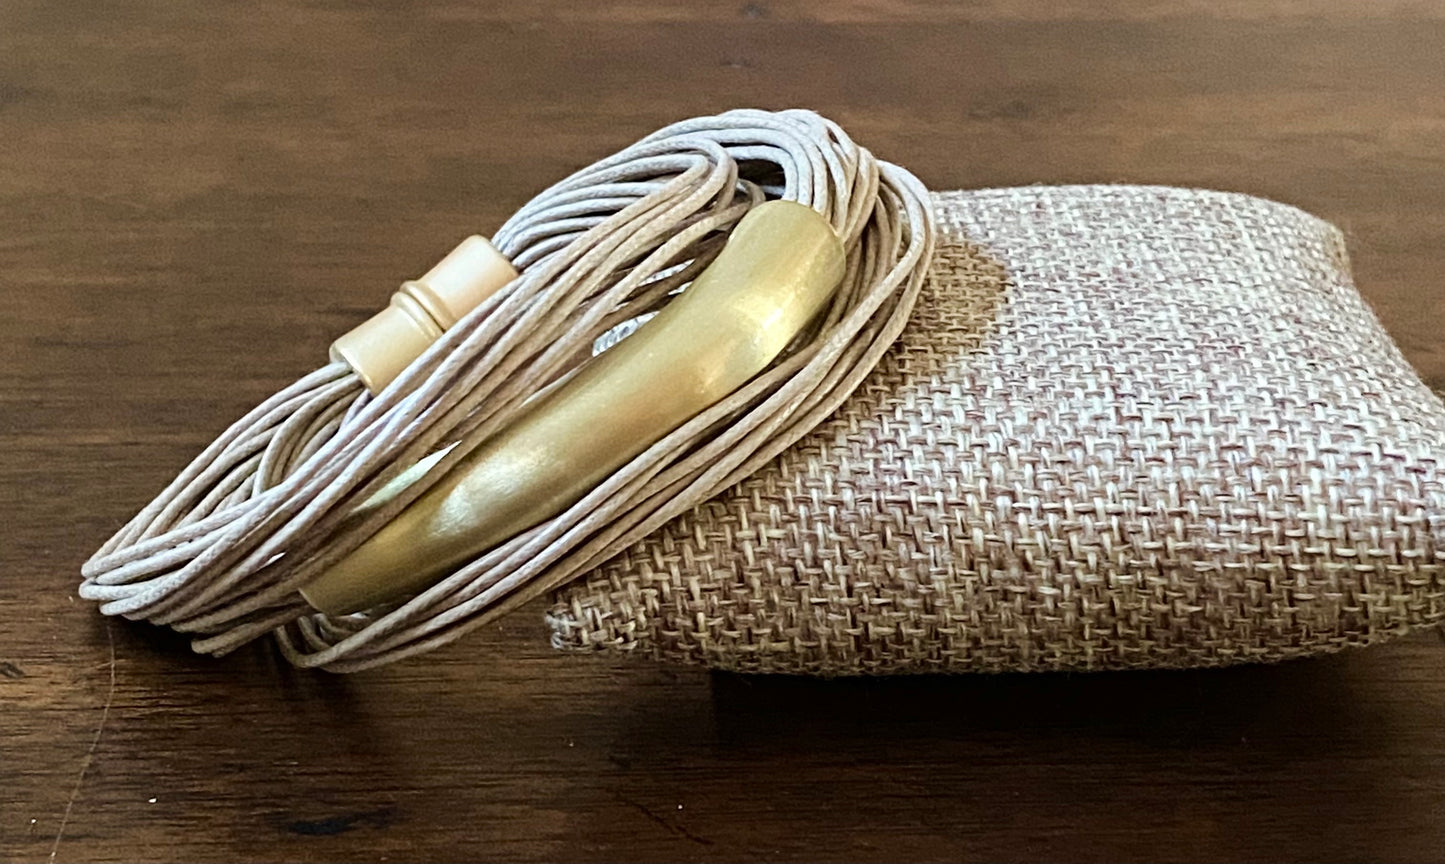 Ladies' Waxed Cord and Matte Gold Bracelet